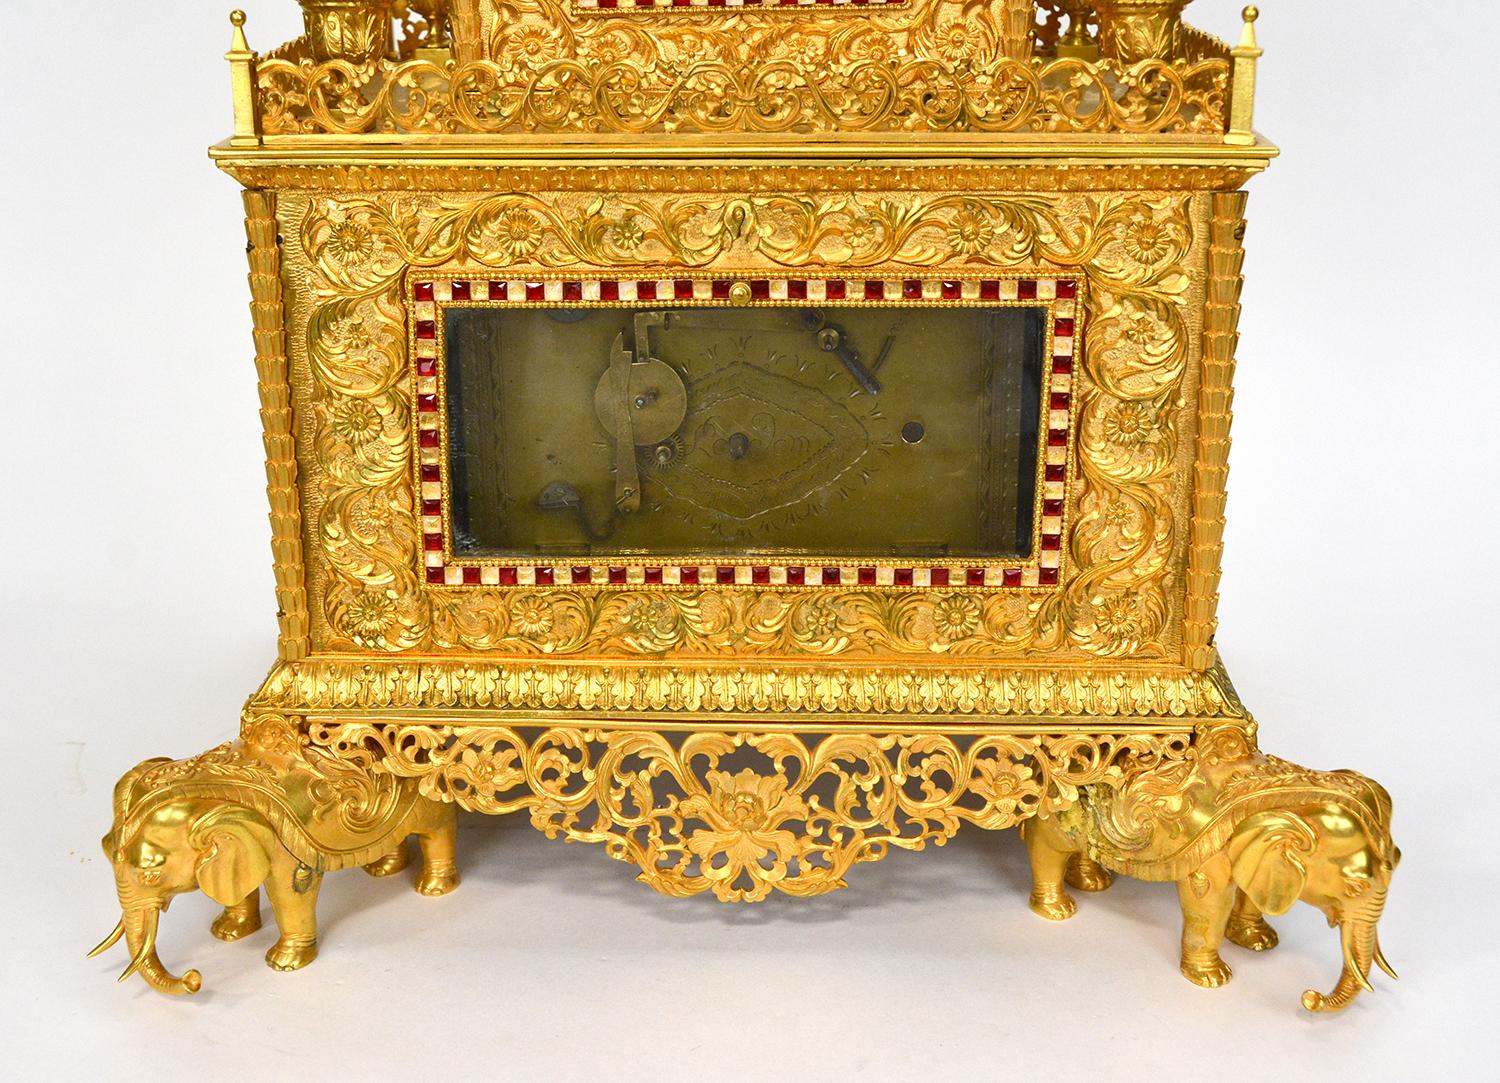 Massive Chinese Ormolu High Relief Gilt Bronze Automaton Musical Clock For Sale 10